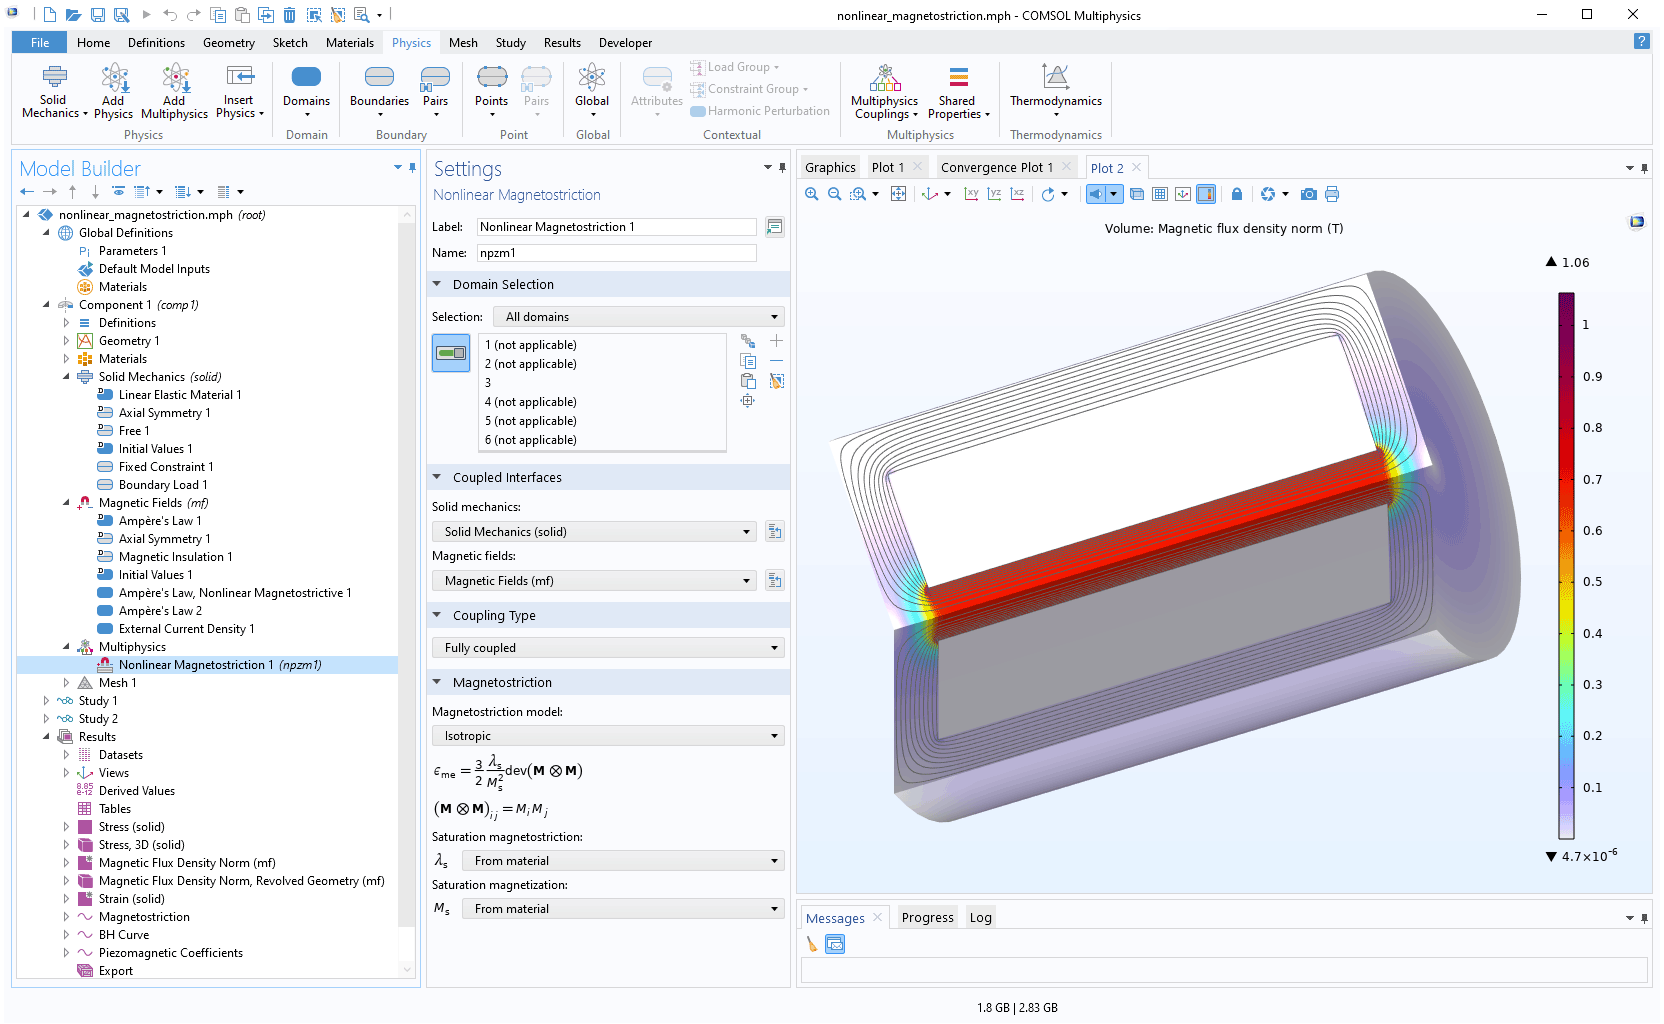 The COMSOL Multiphysics UI showing the Model Builder with the Nonlinear Magnetostriction node highlighted, the corresponding Settings window, and a transducer model in the Graphics window.